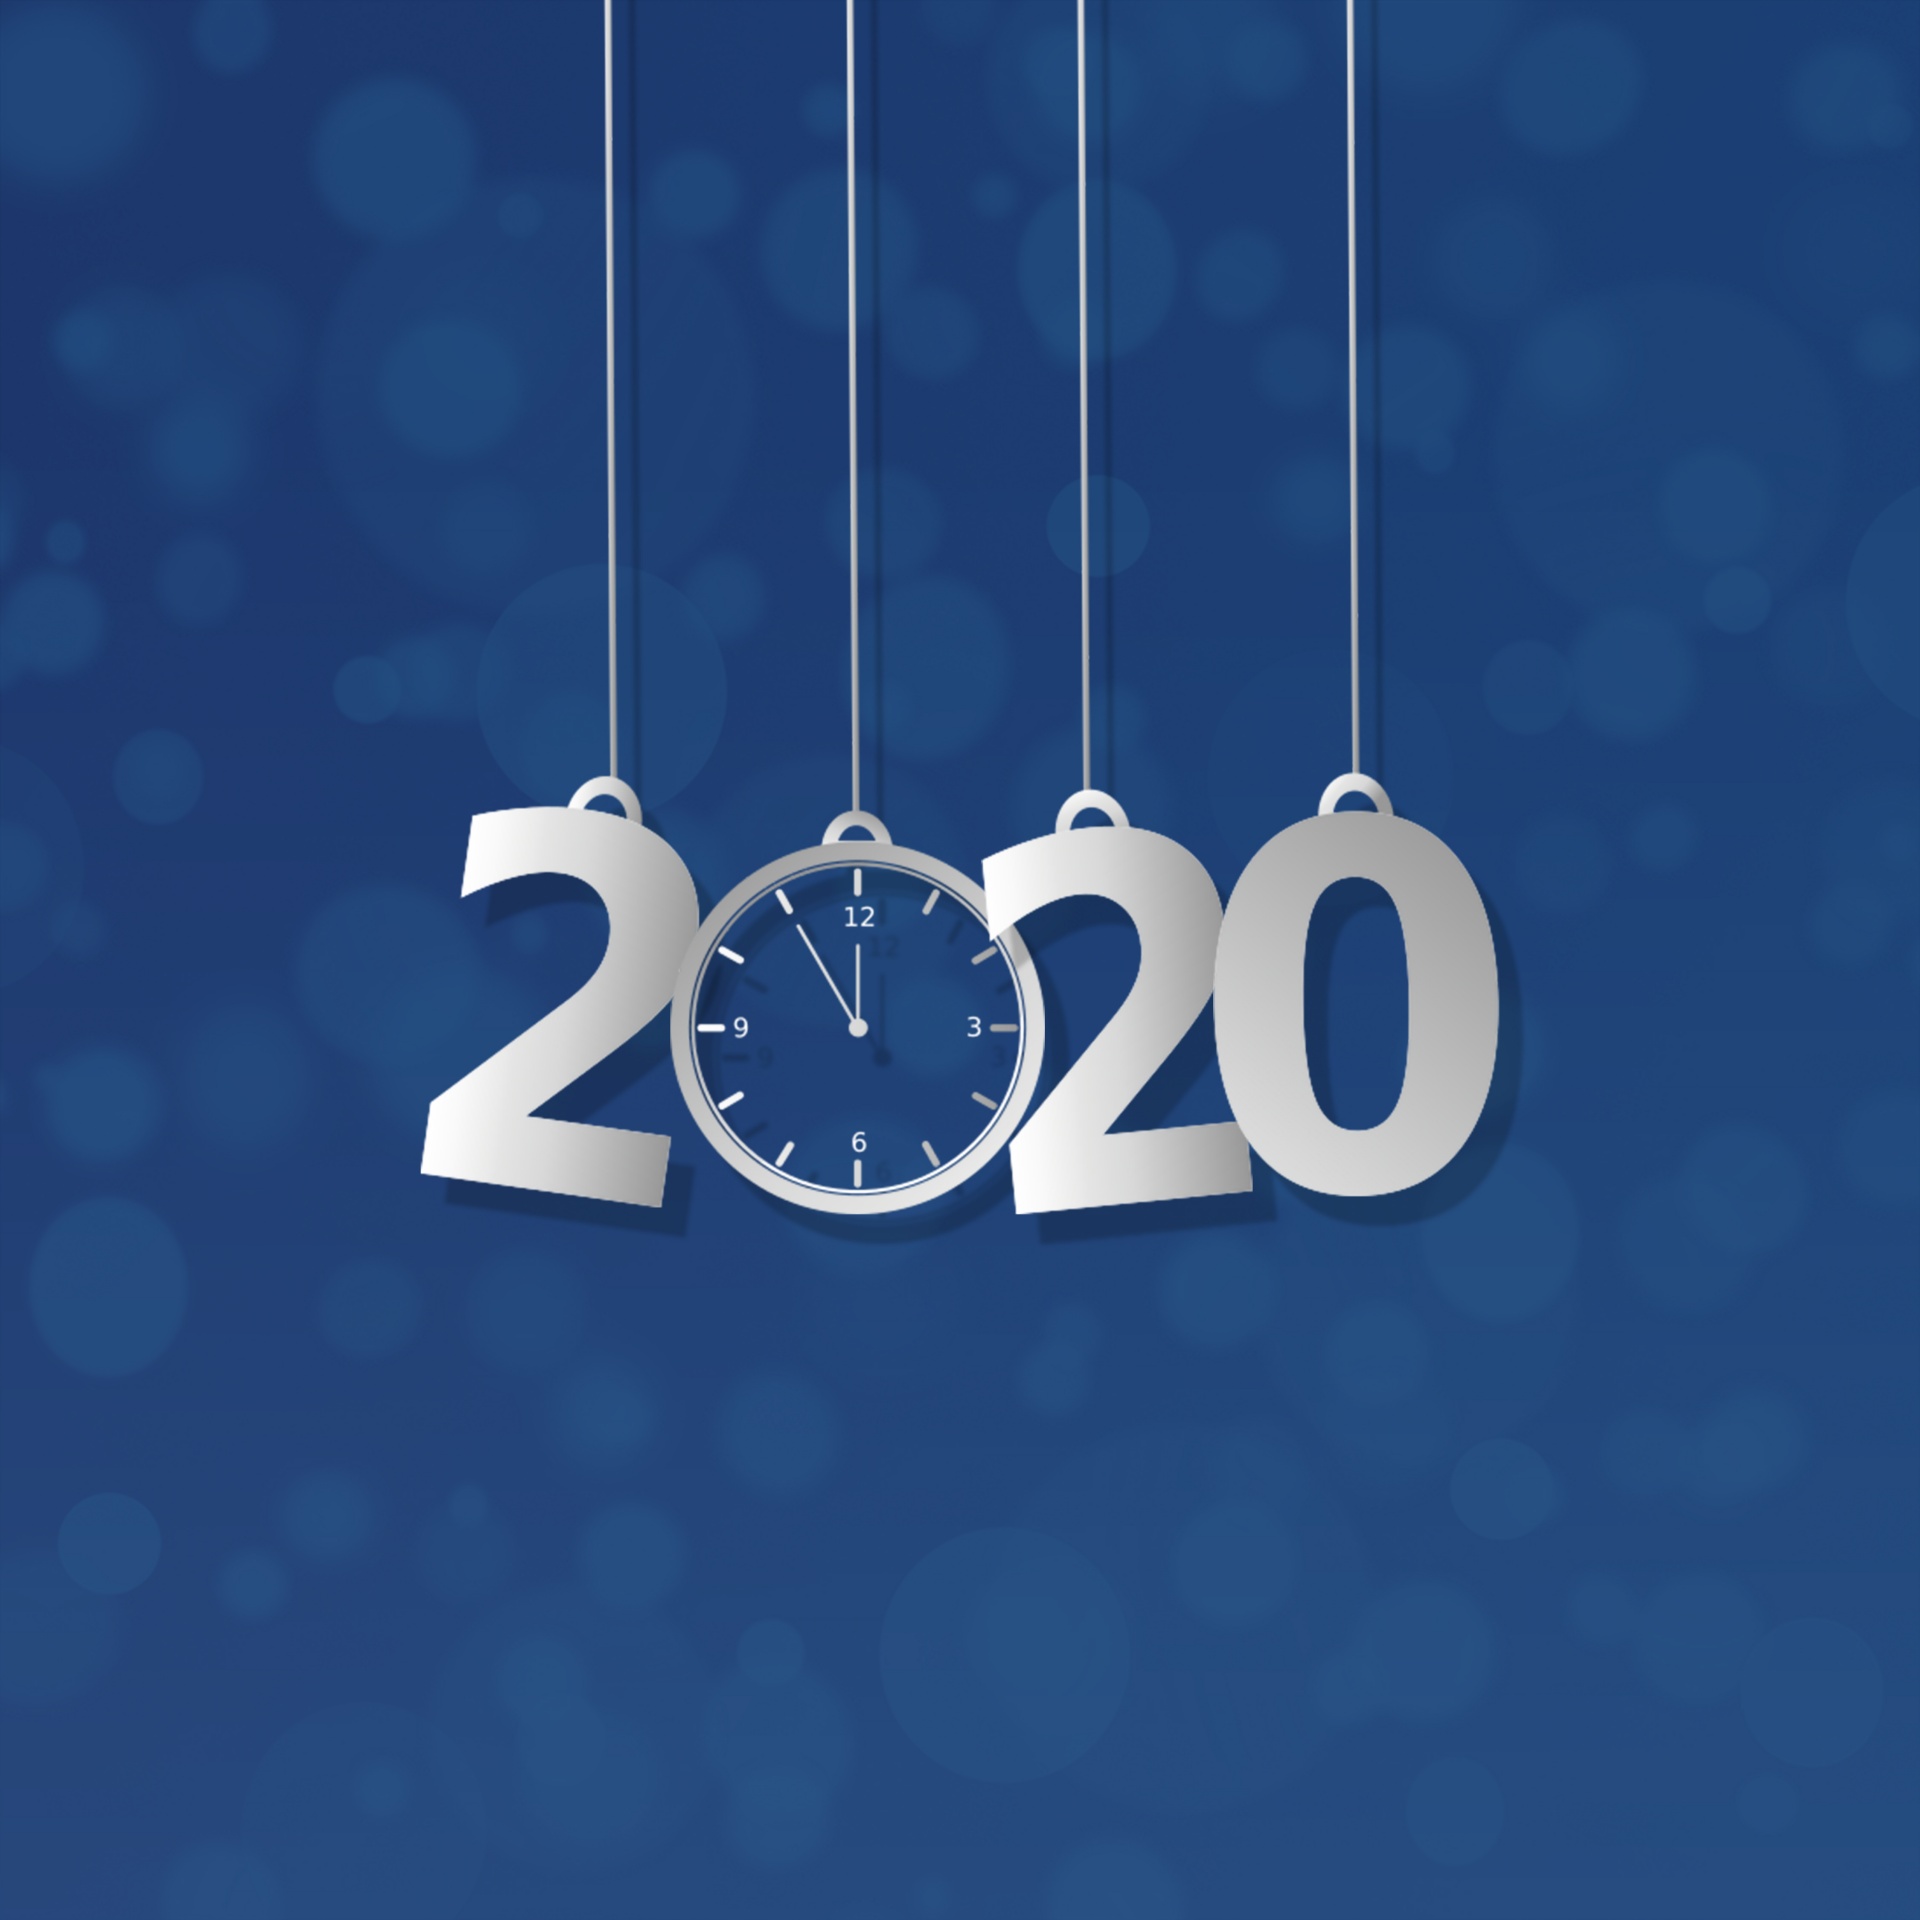 2020-new-year-fund-free-stock-photo-public-domain-pictures